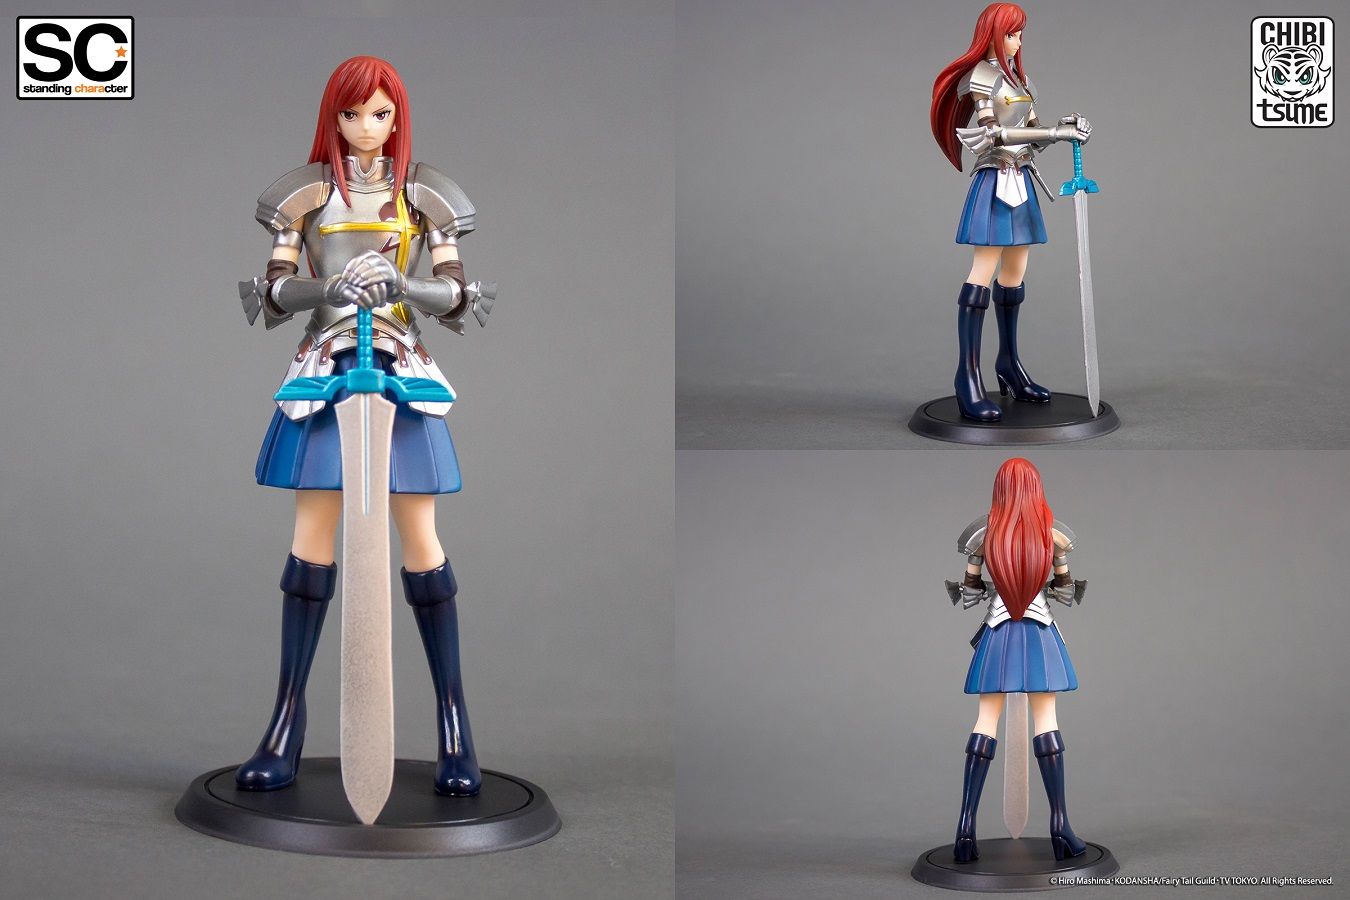 goodie - Erza Scarlett - SC - Standing Characters - Tsume